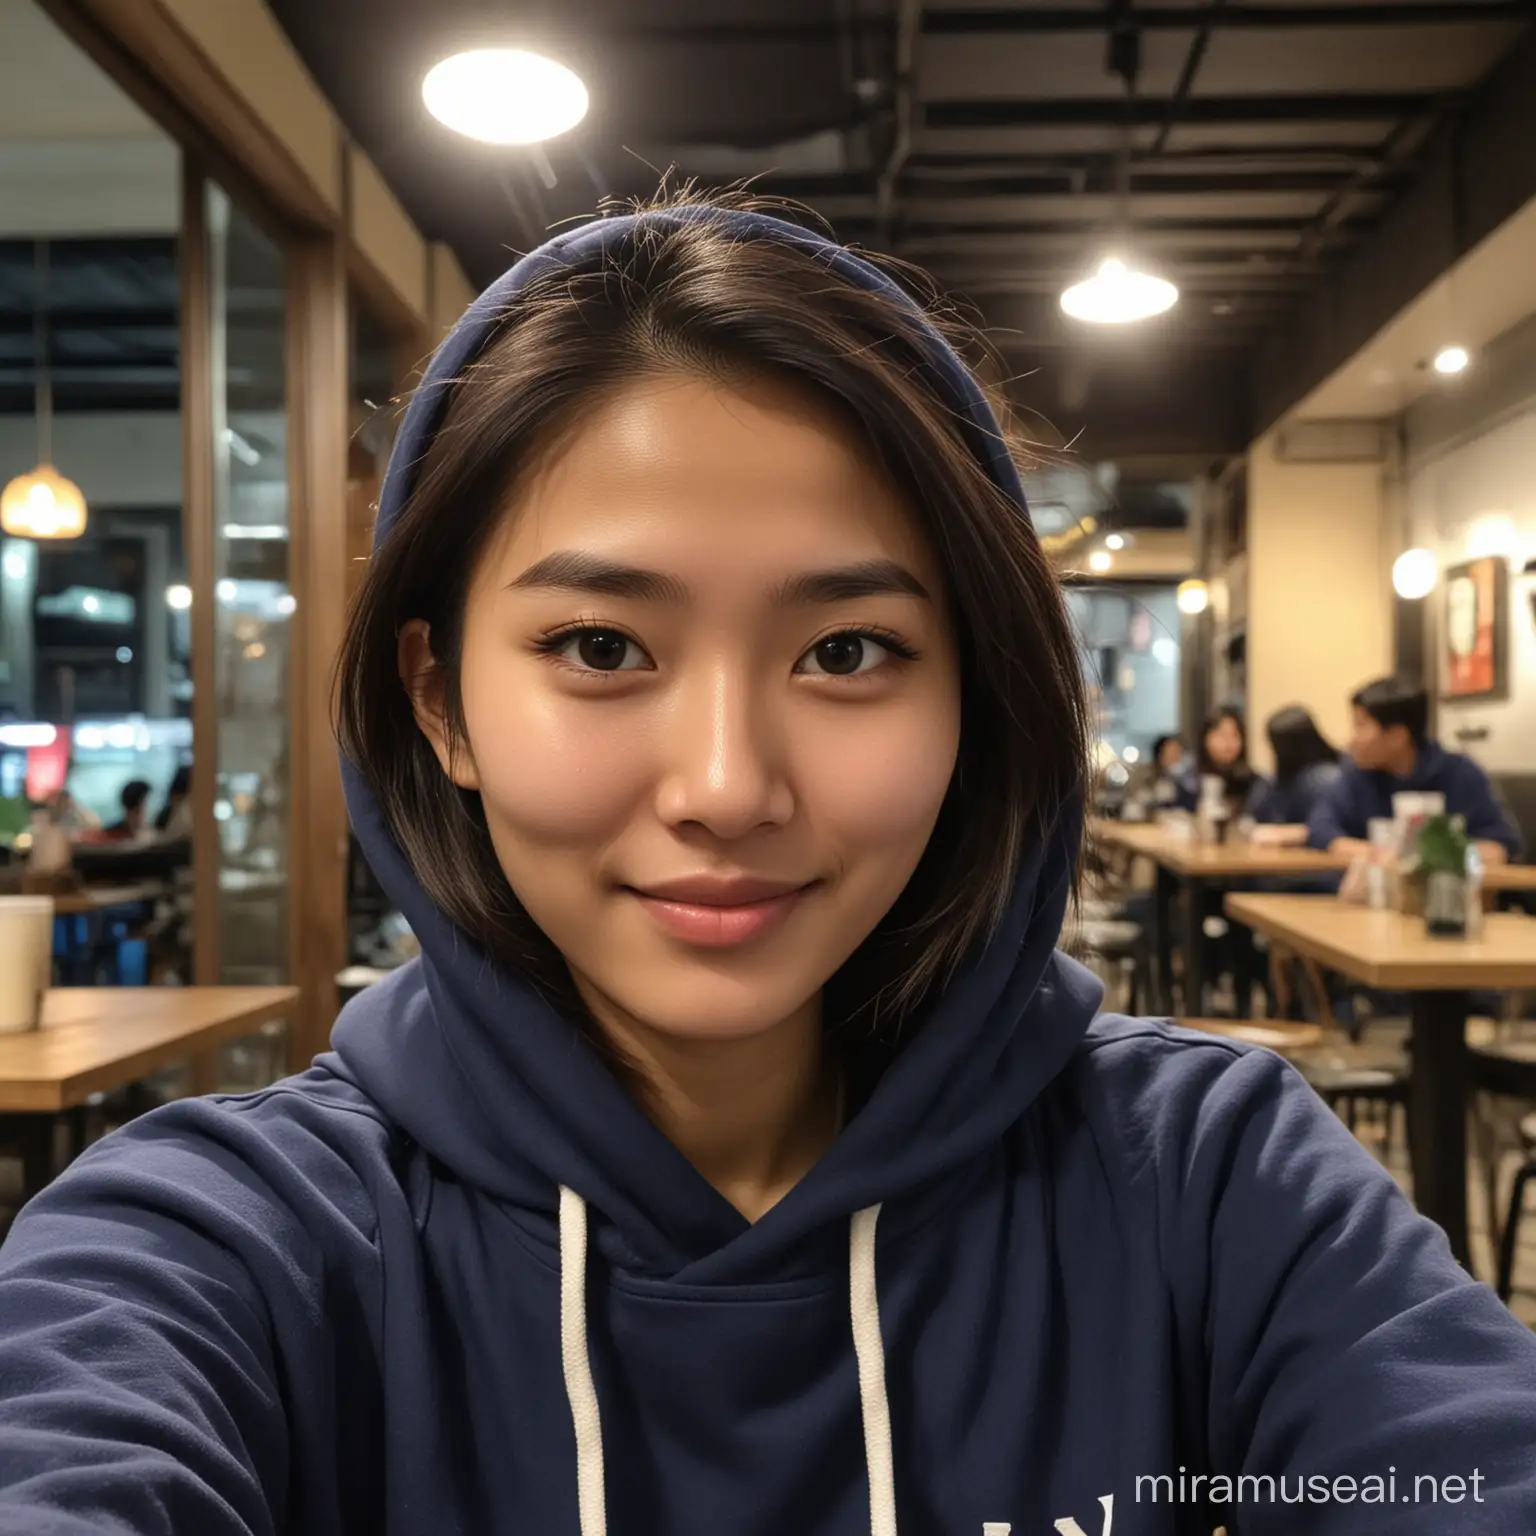 An Indonesian woman wearing contemporary clothes, 21 years old, is sitting for a selfie with a 22 year old Chinese man wearing a navy hoodie, in the background of an indoor cafe at night.